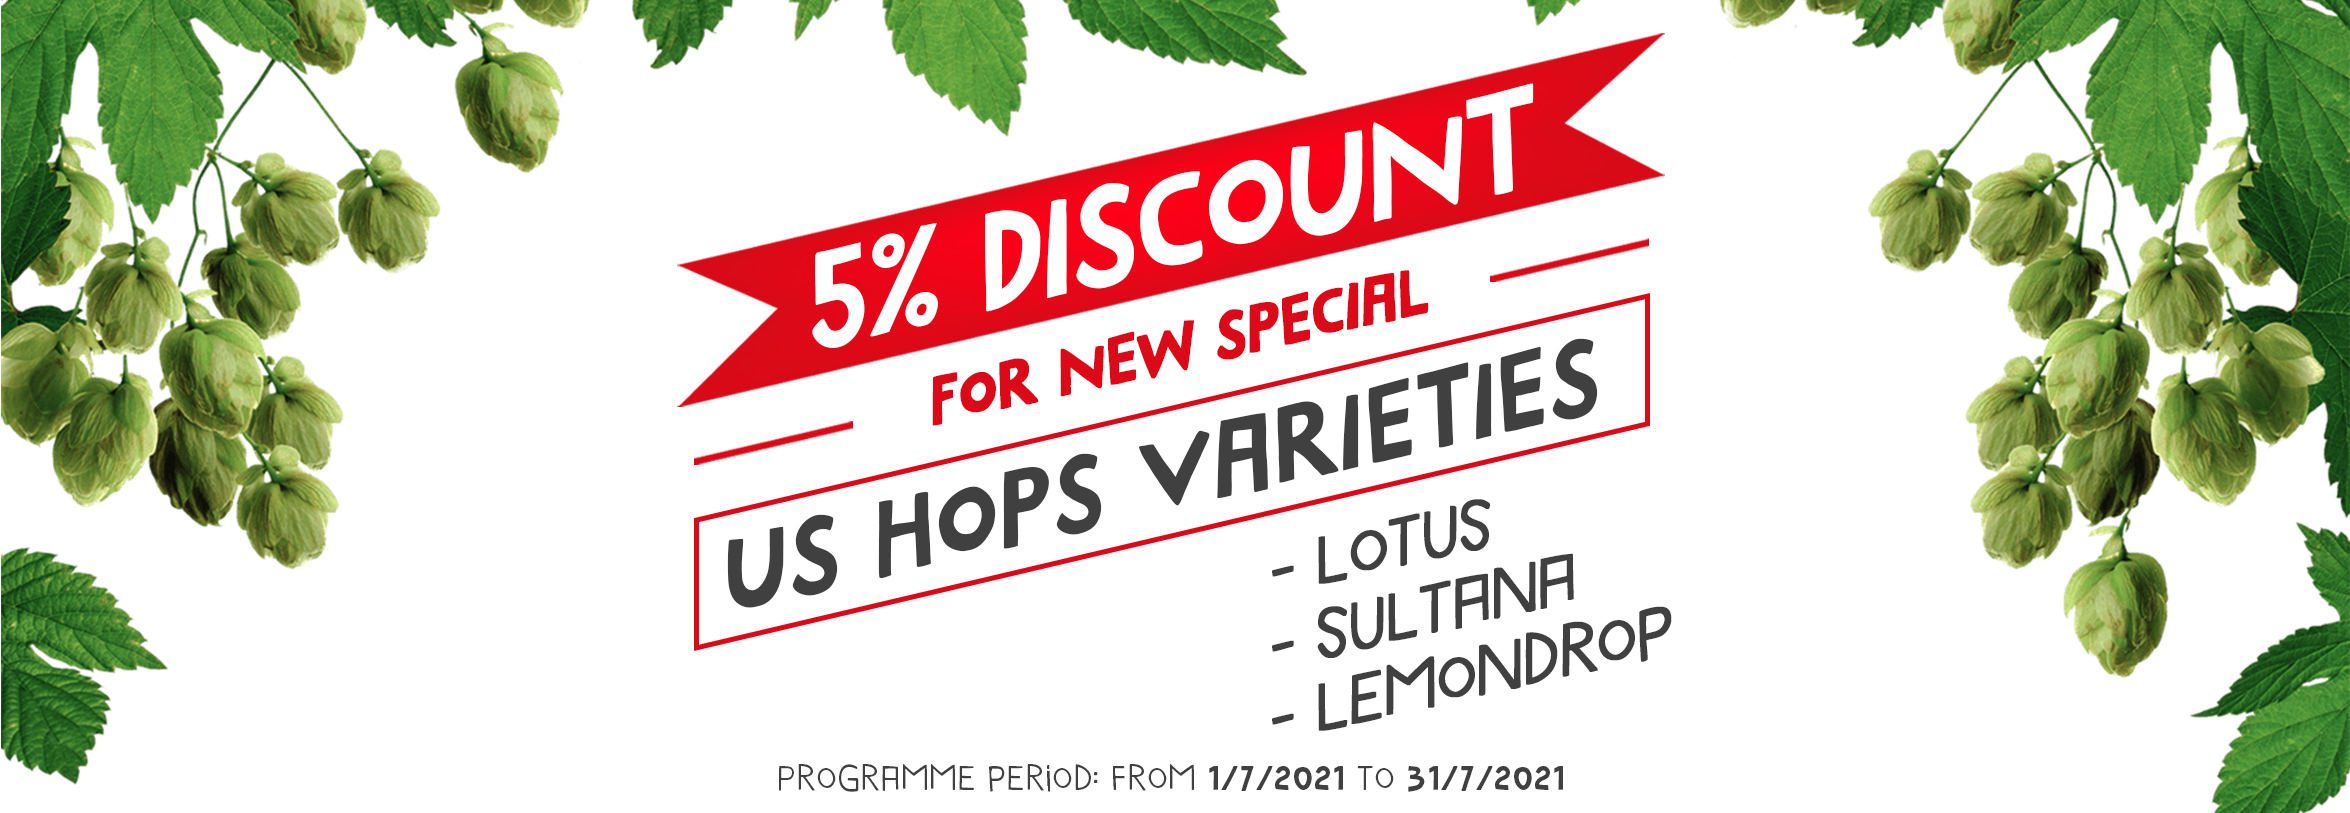 Discount for New US hops